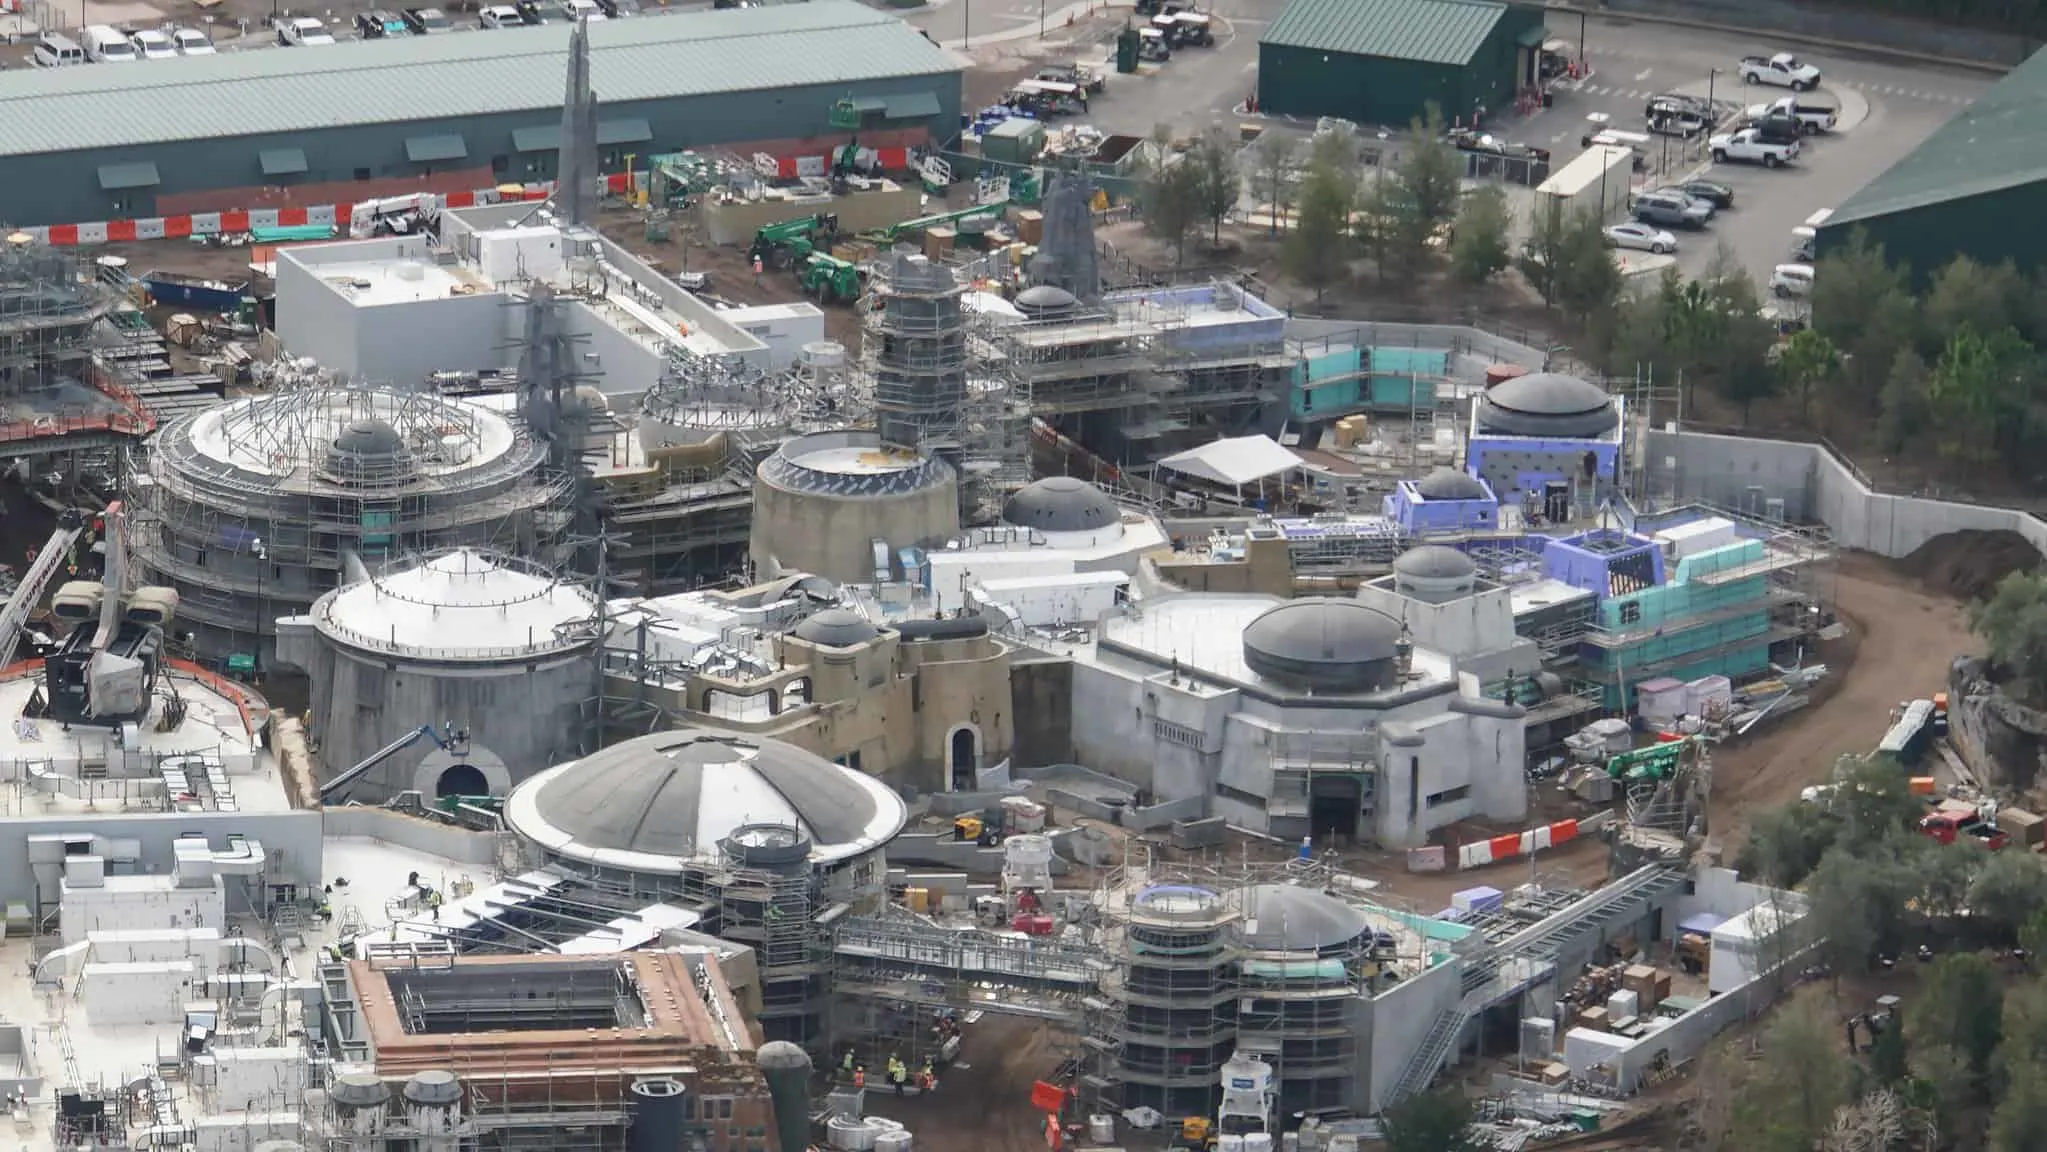 Galaxy's Edge Update February 2019 Black Spire Outpost side view